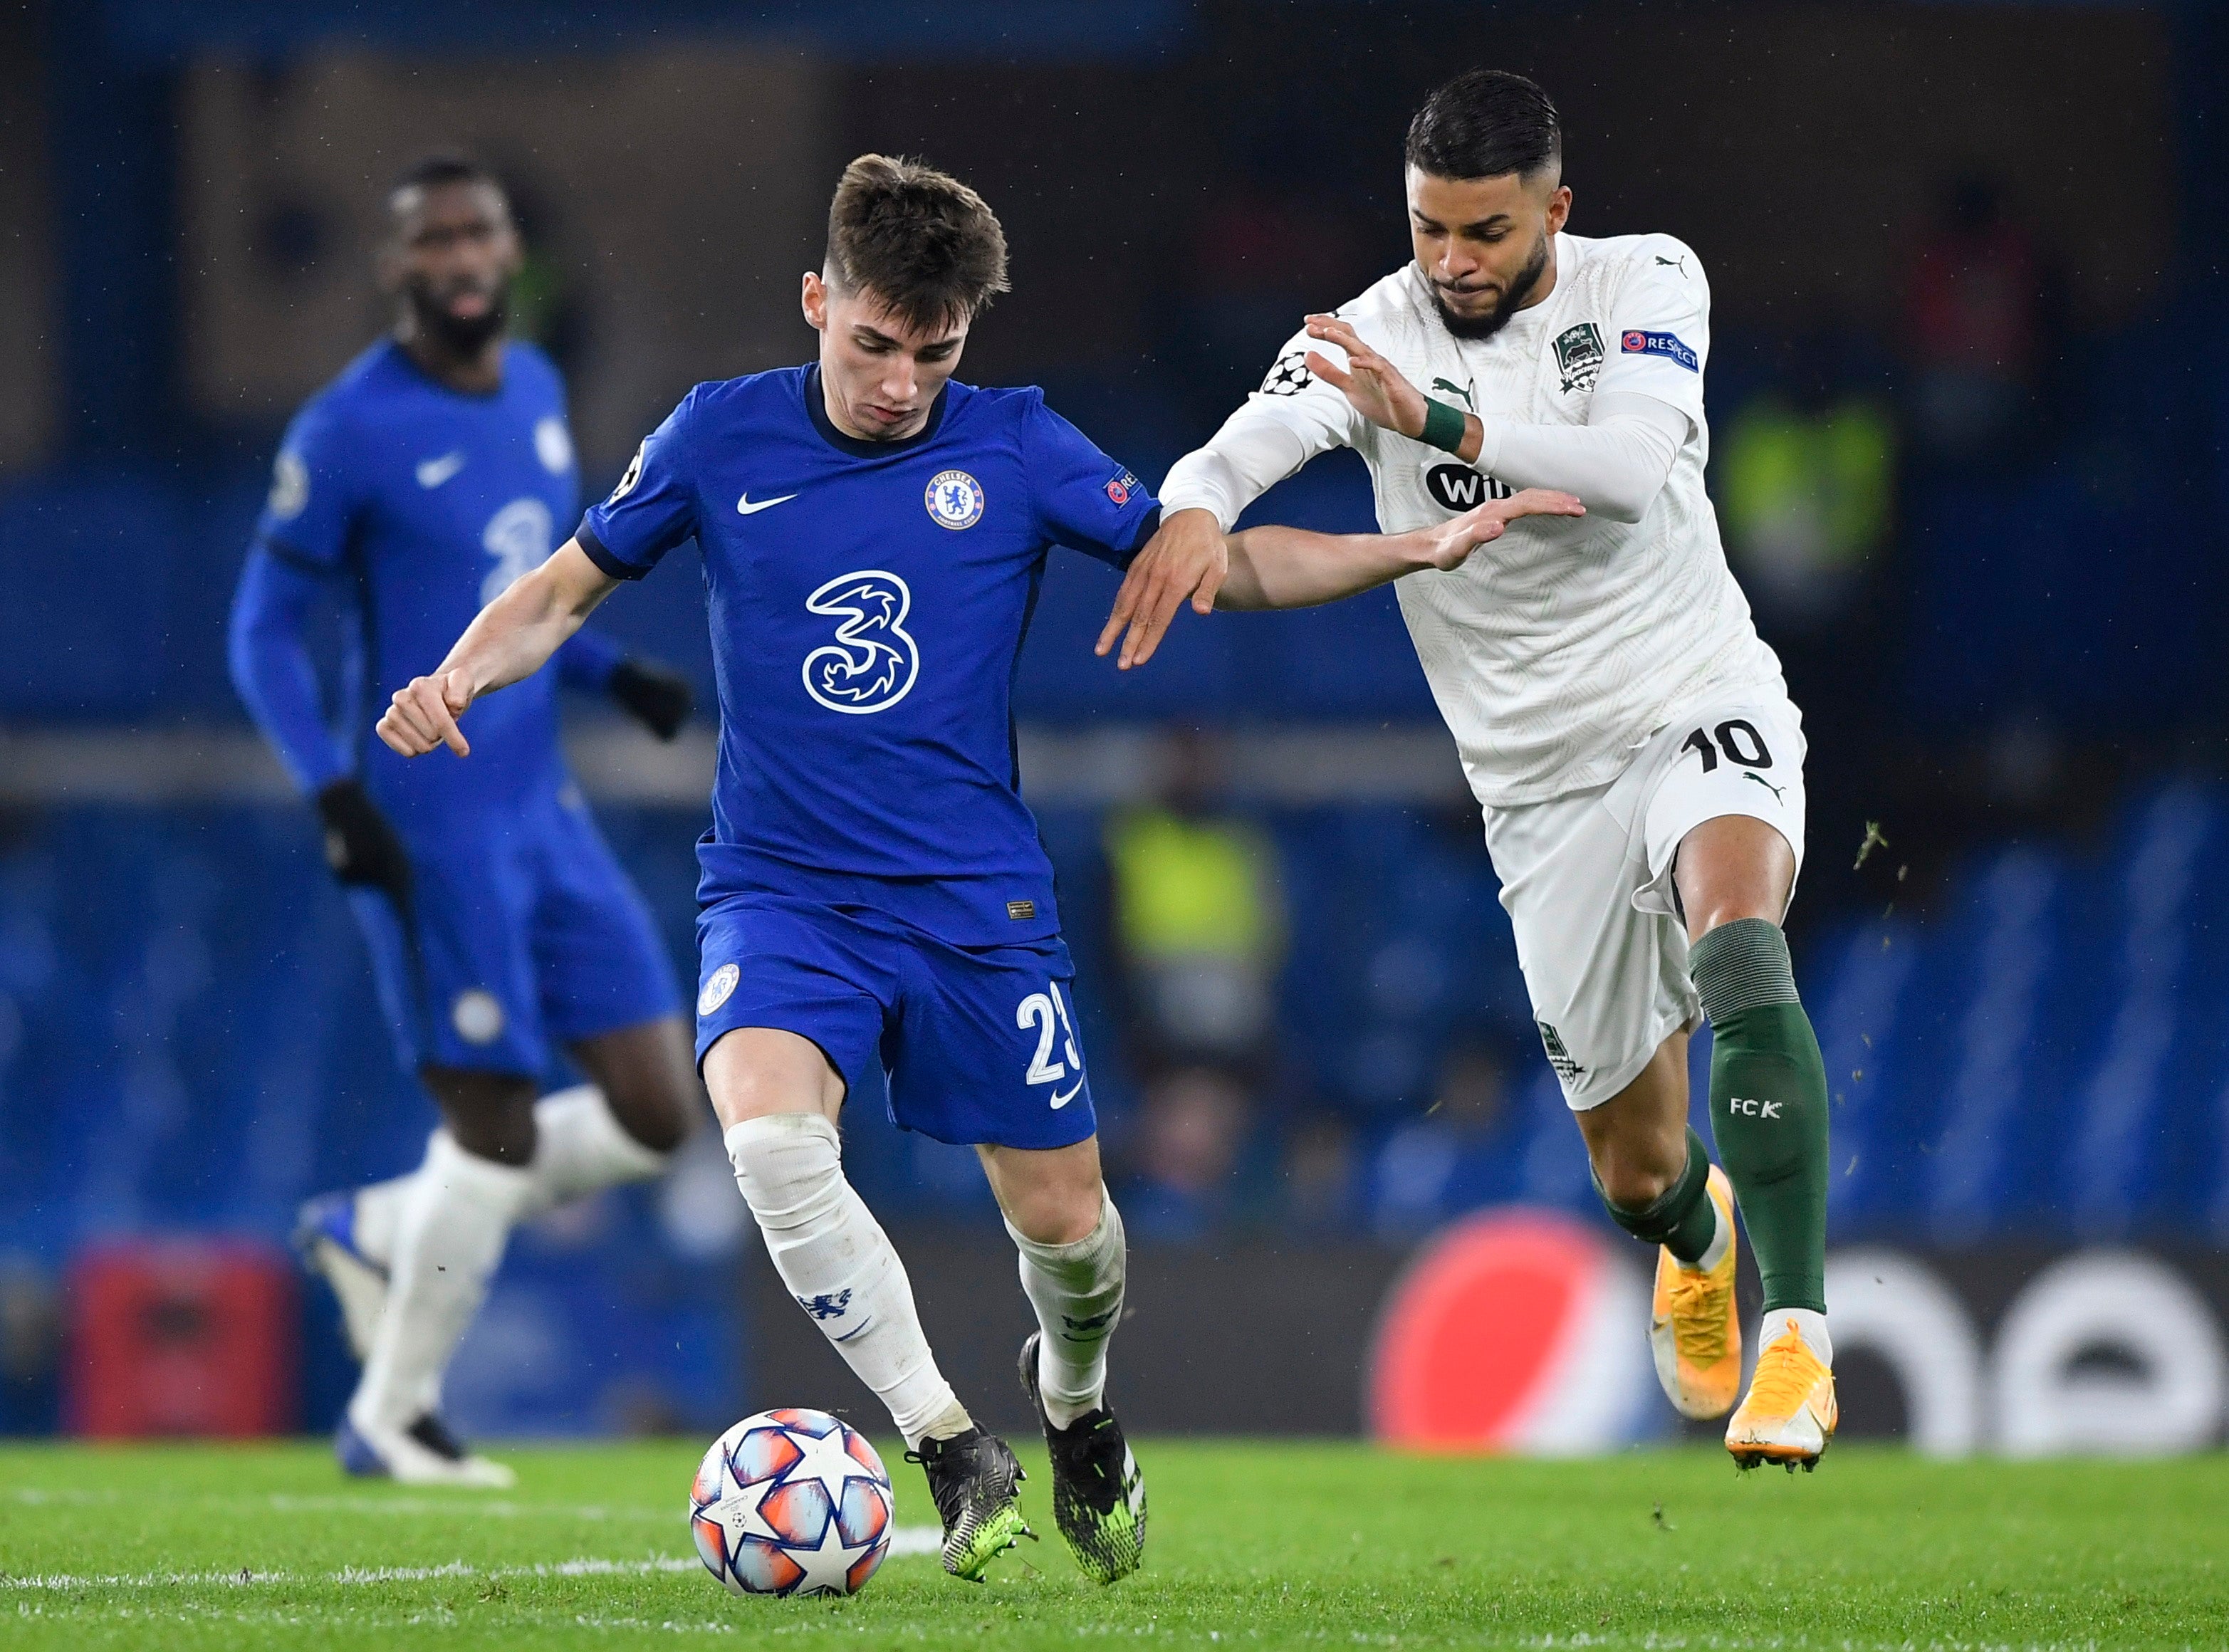 Chelsea’s Billy Gilmour put in an assured display